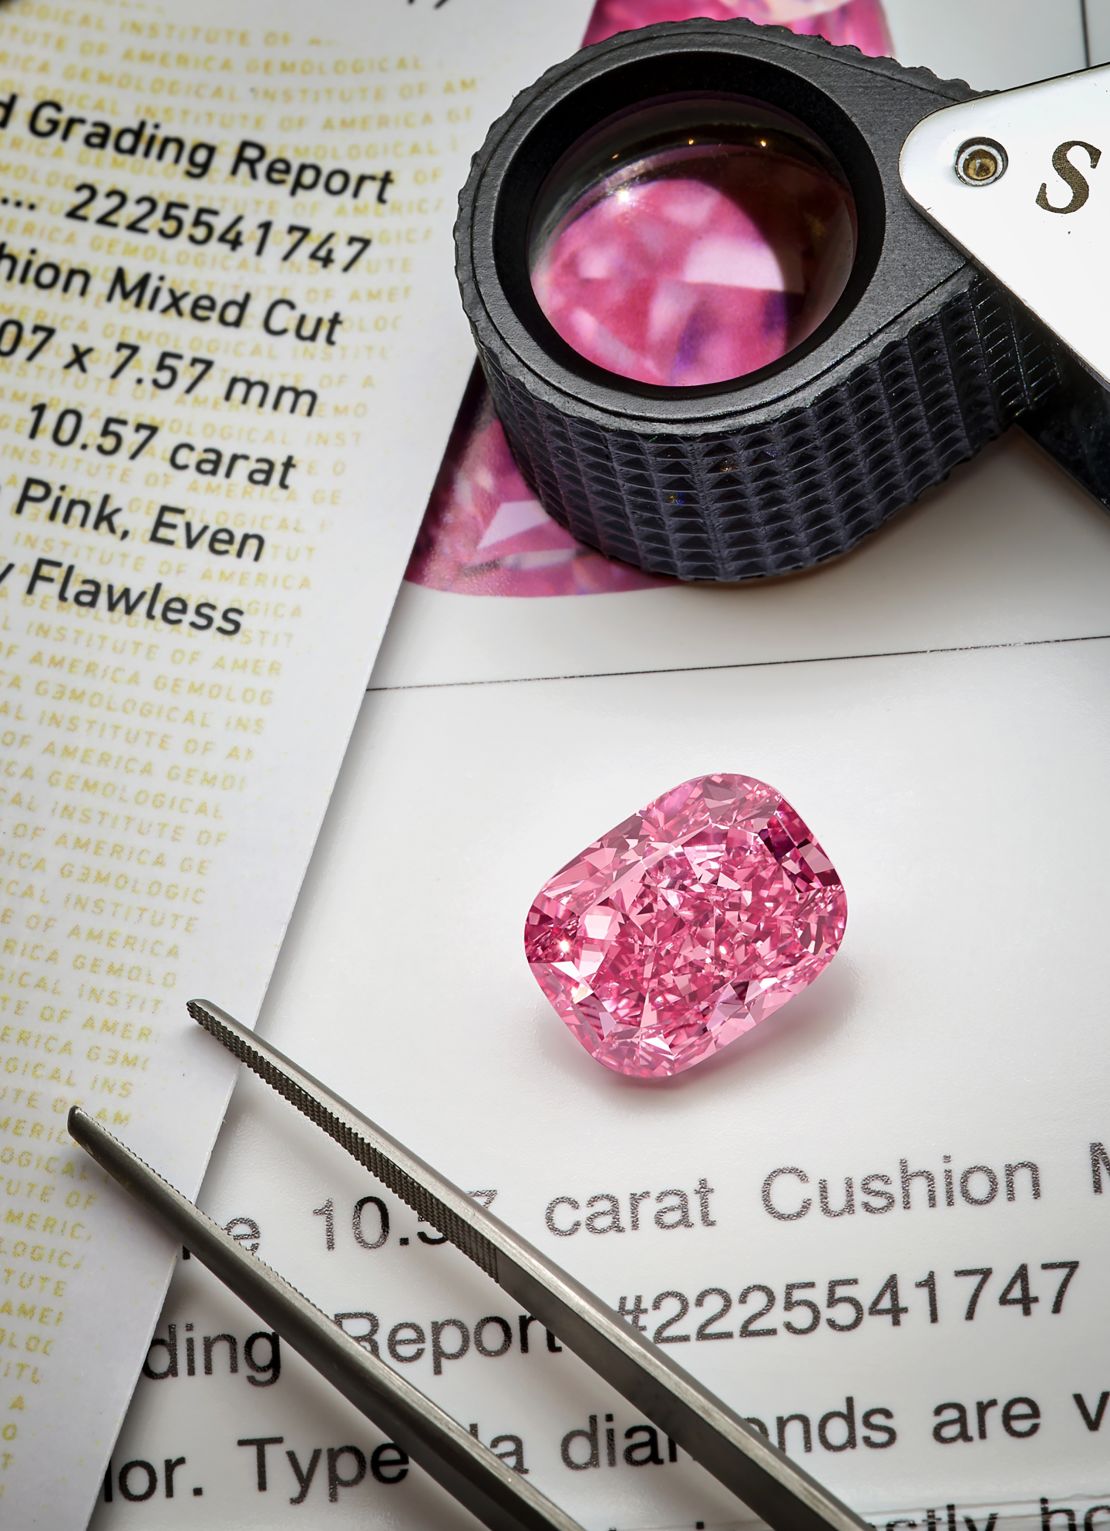 Weighing 10.57 carats and named The Eternal Pink, the "ultra-rare" gemstone went under the hammer in June.